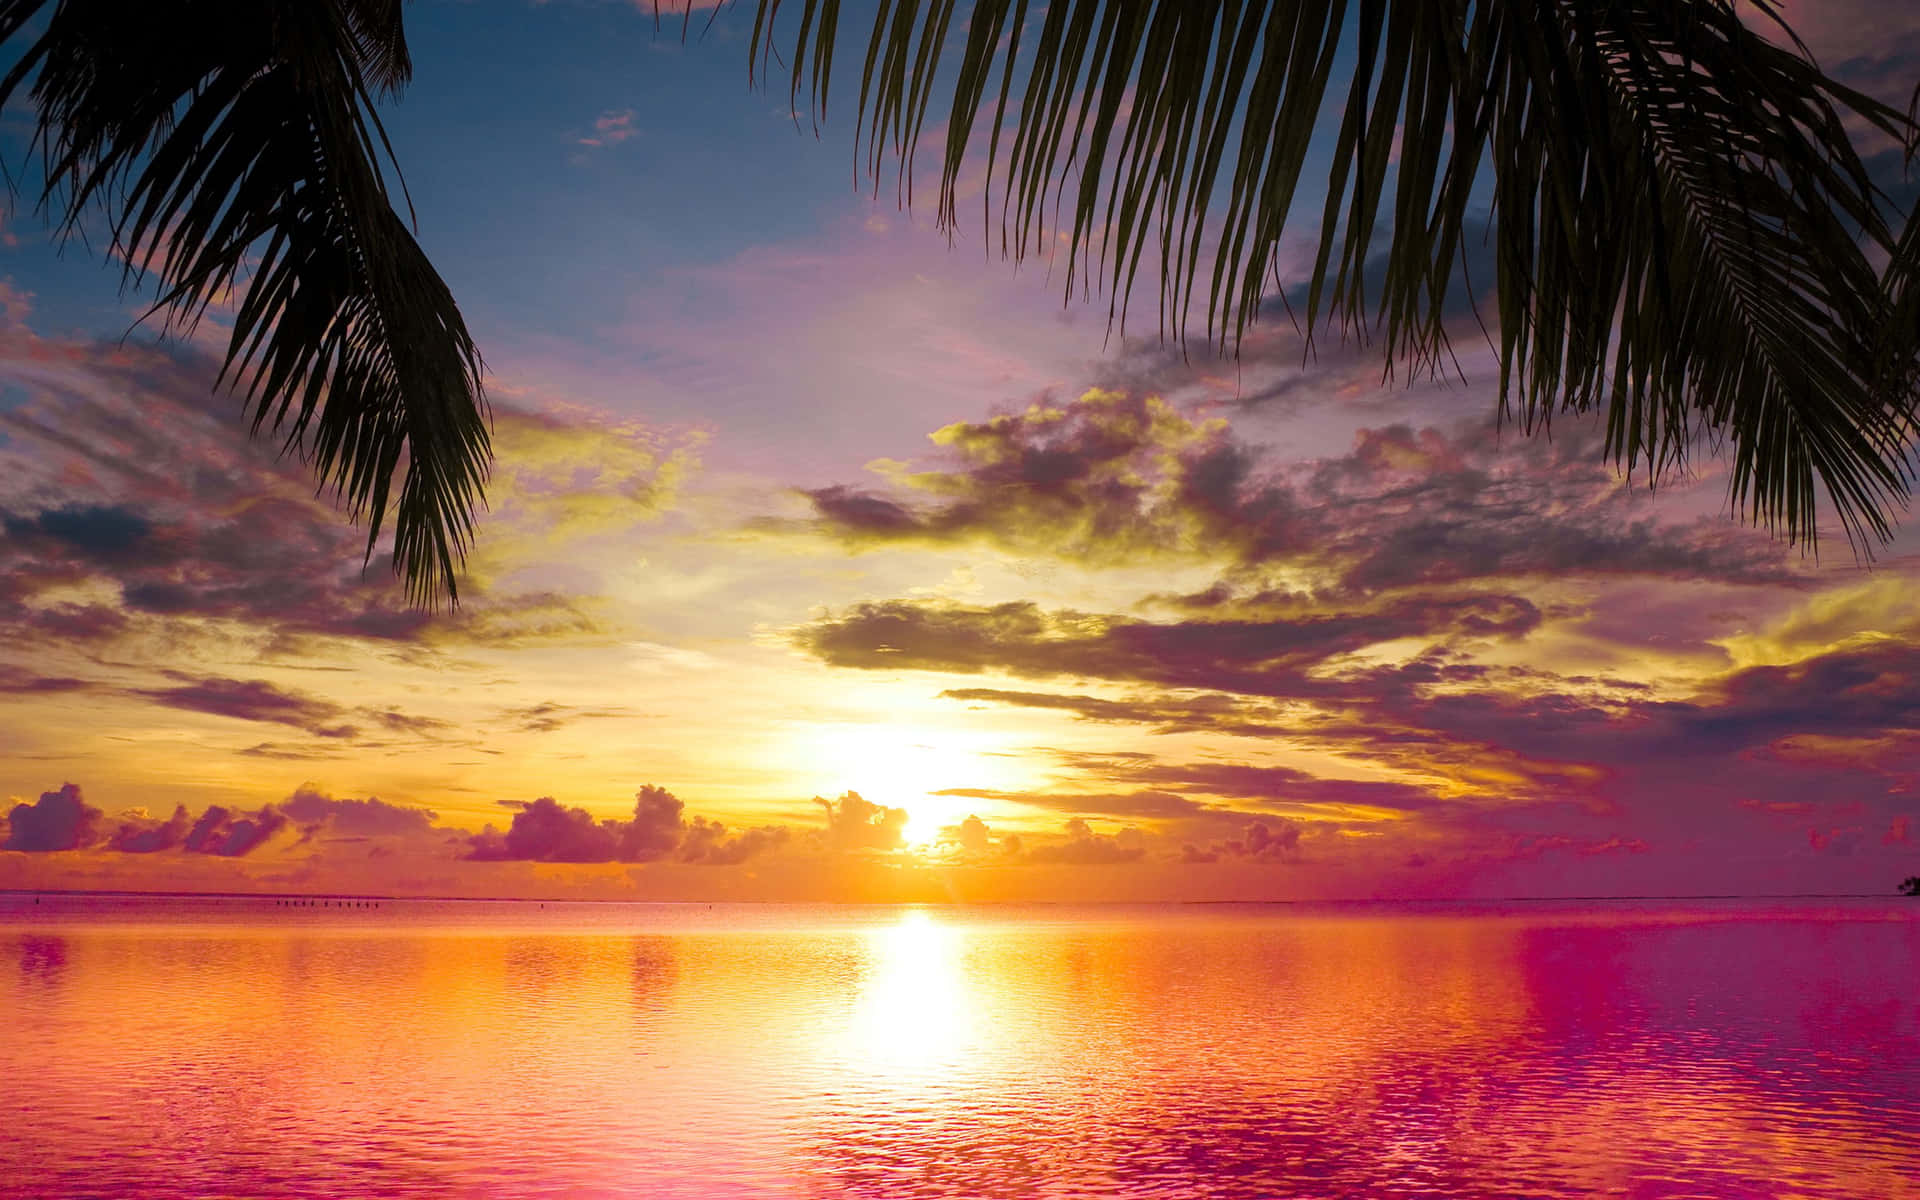 sunset over the ocean with palm trees